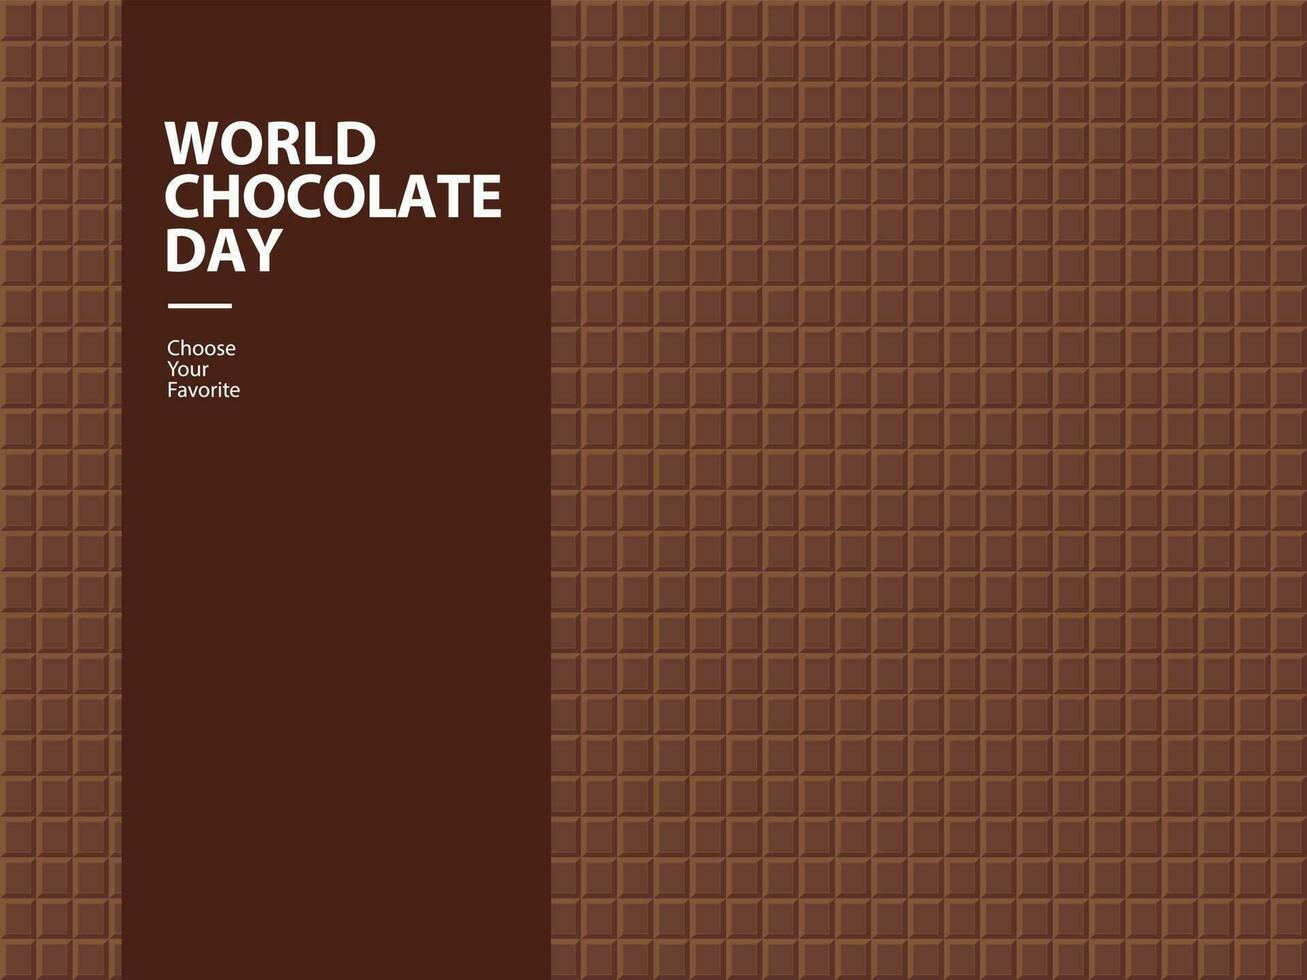 world chocolate day event pattern wallpaper vector element cacao cocoa element dessert summer food